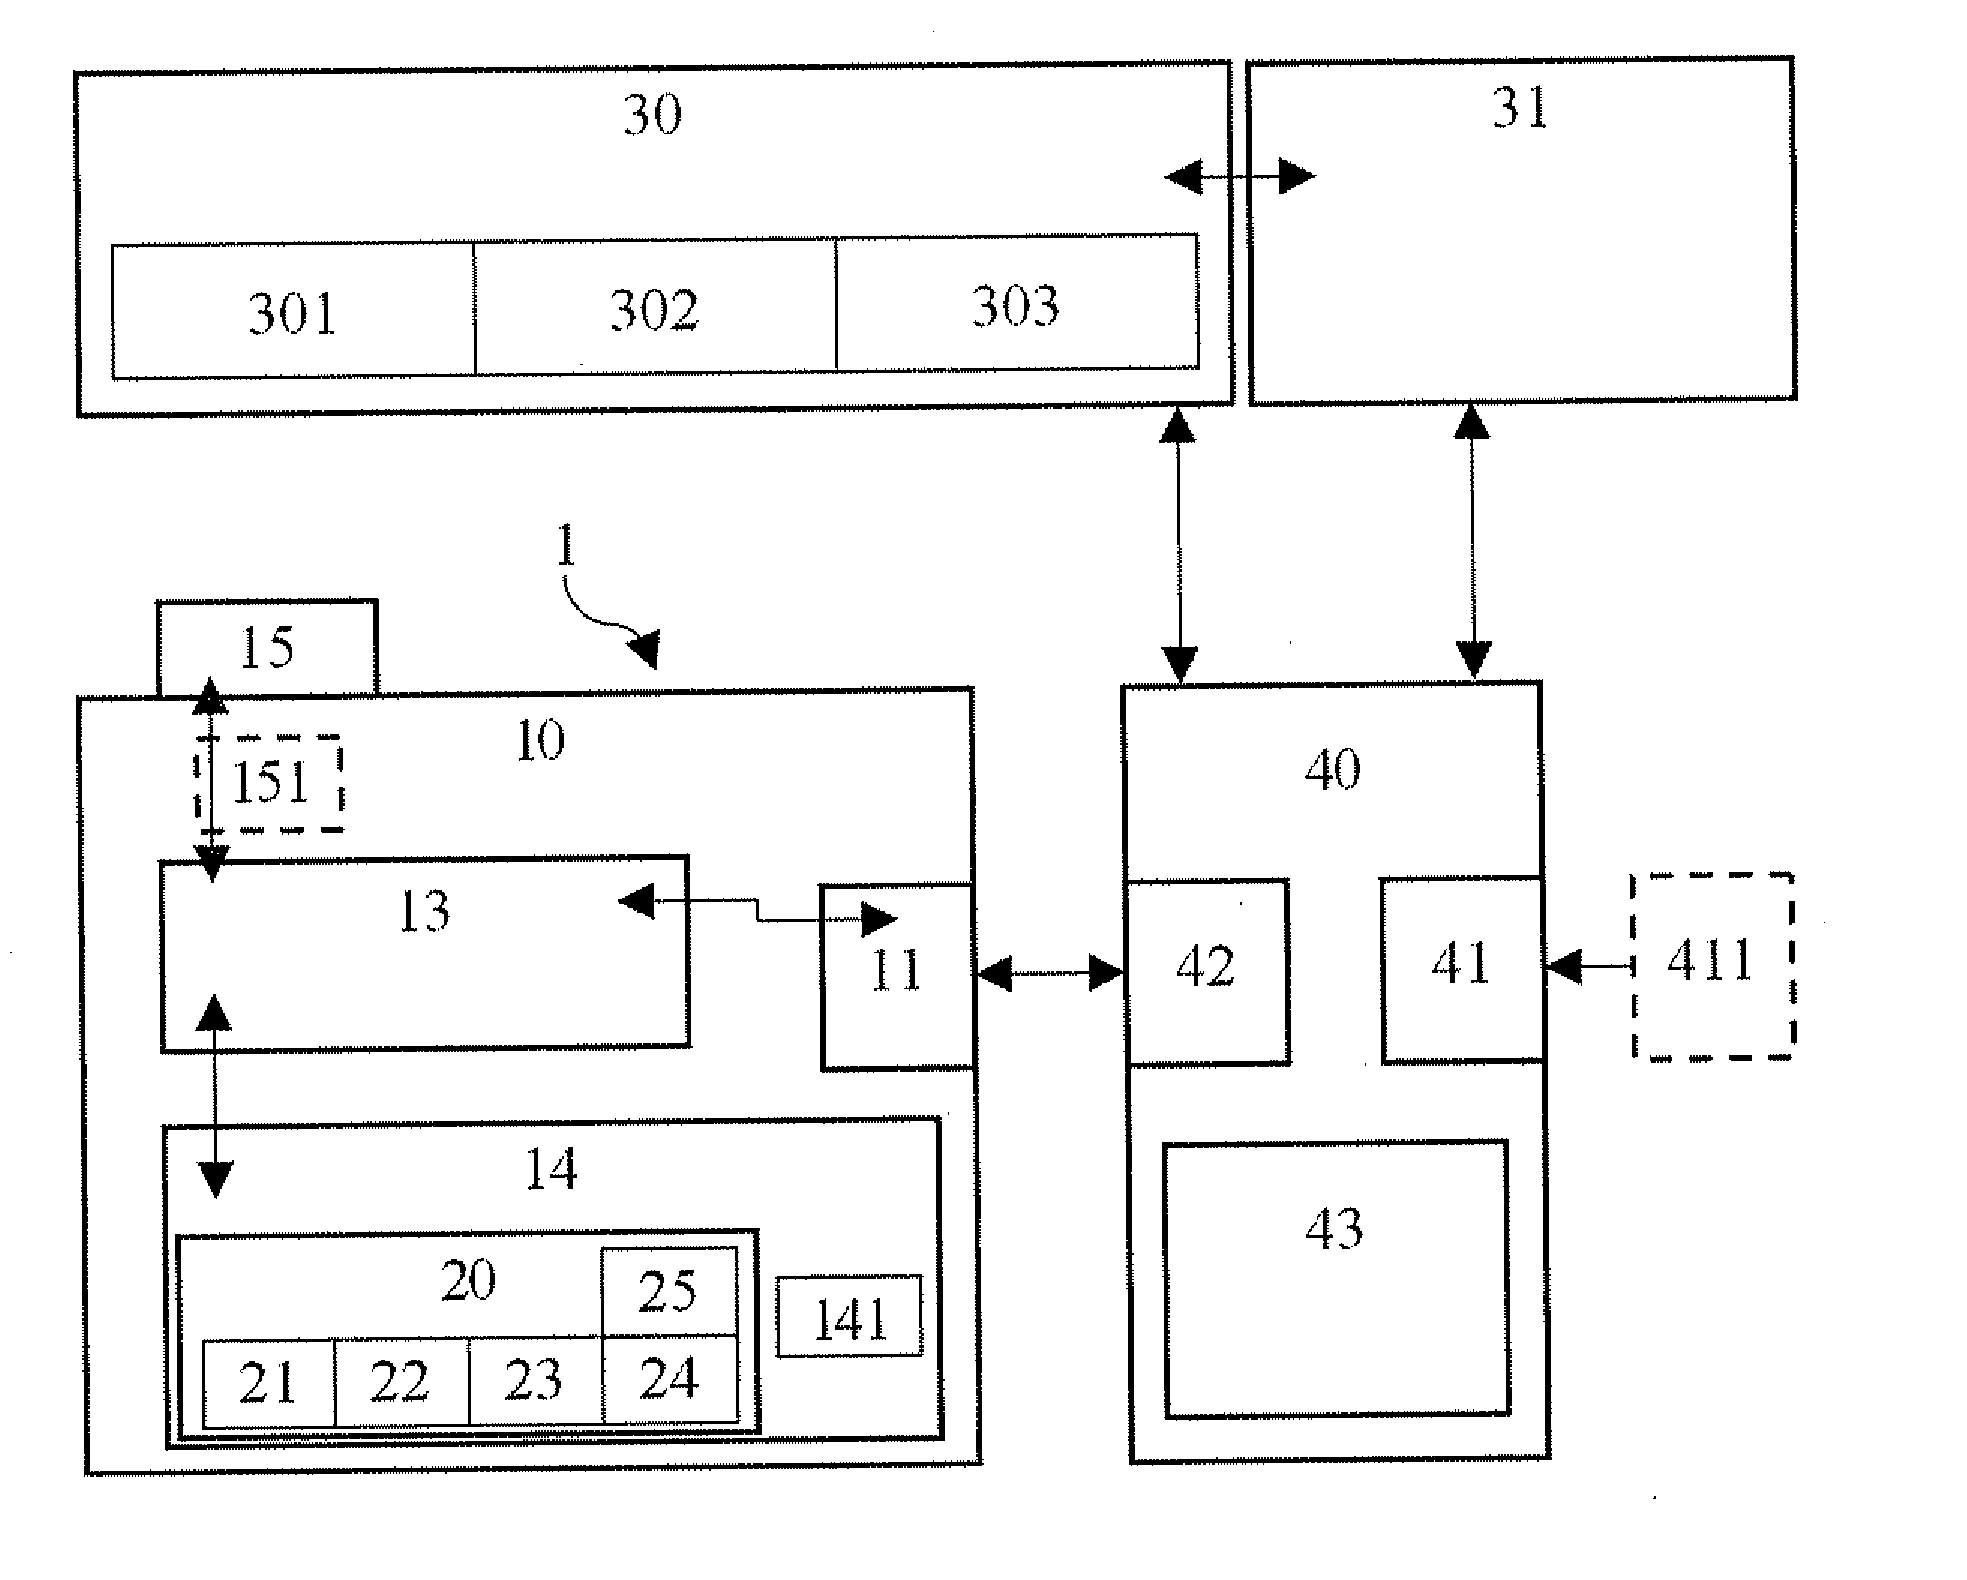 Storage device with a communications function